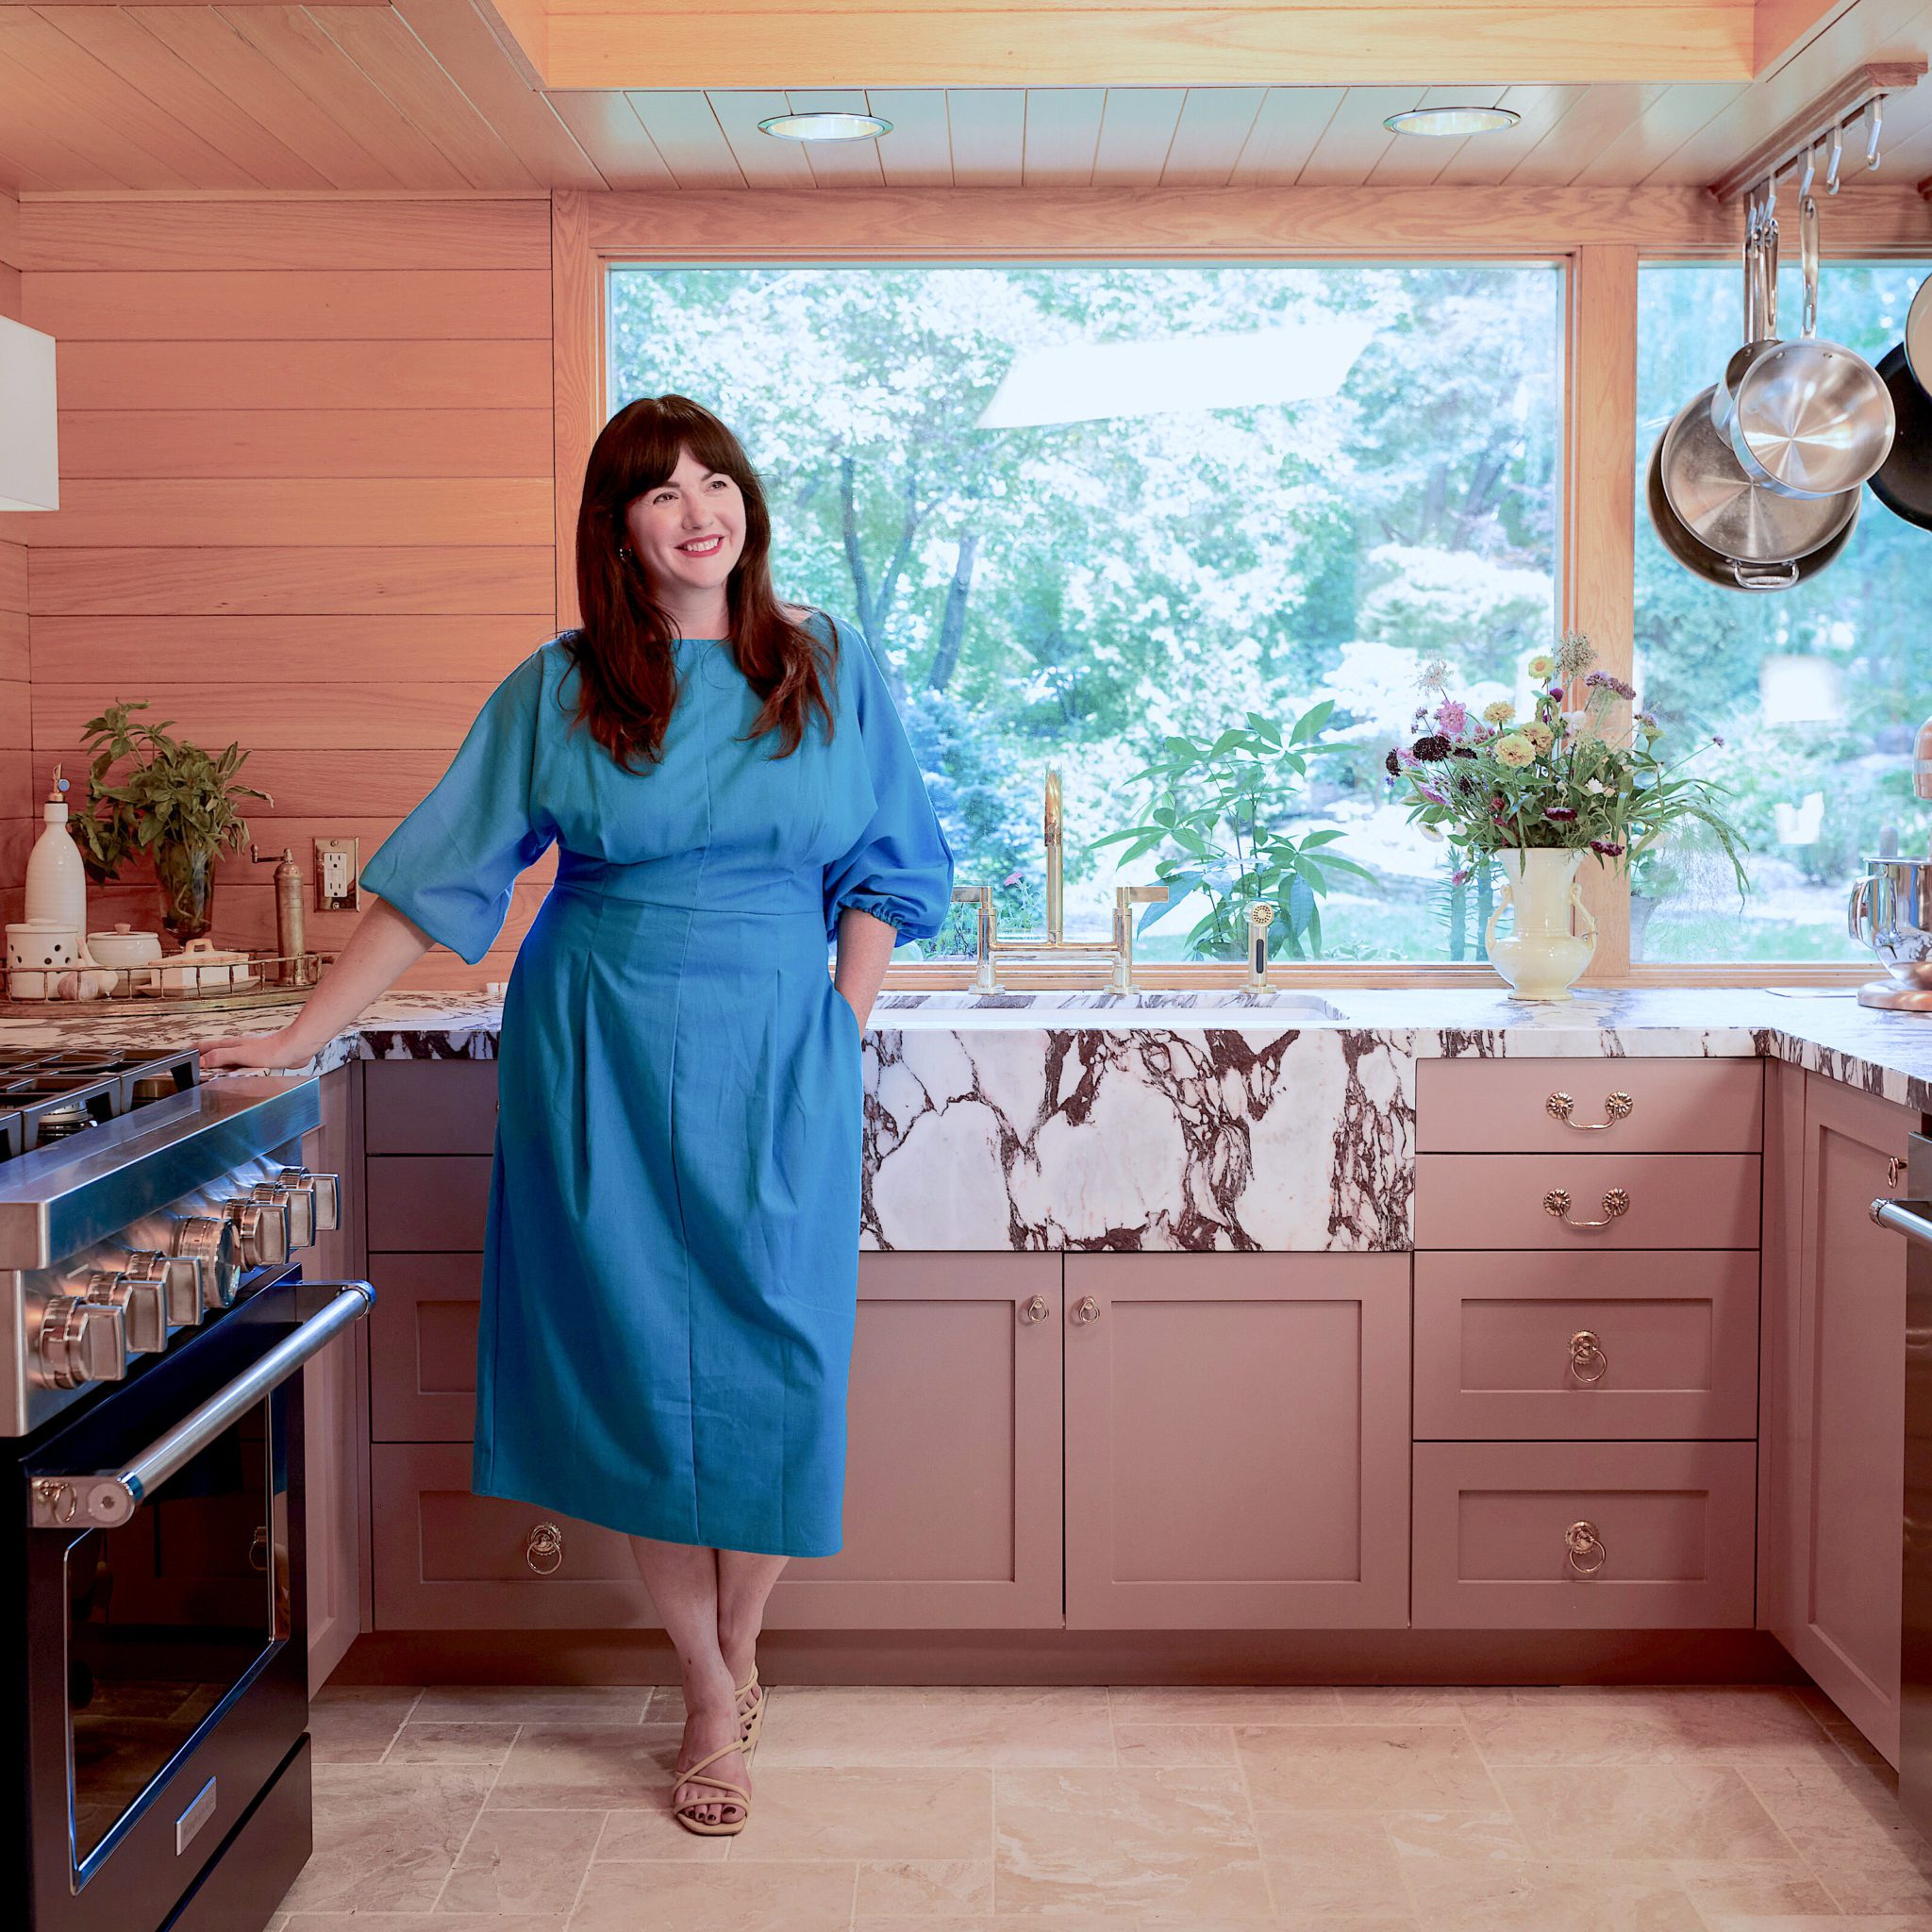 Woman standing in a colorful kitchen smiling